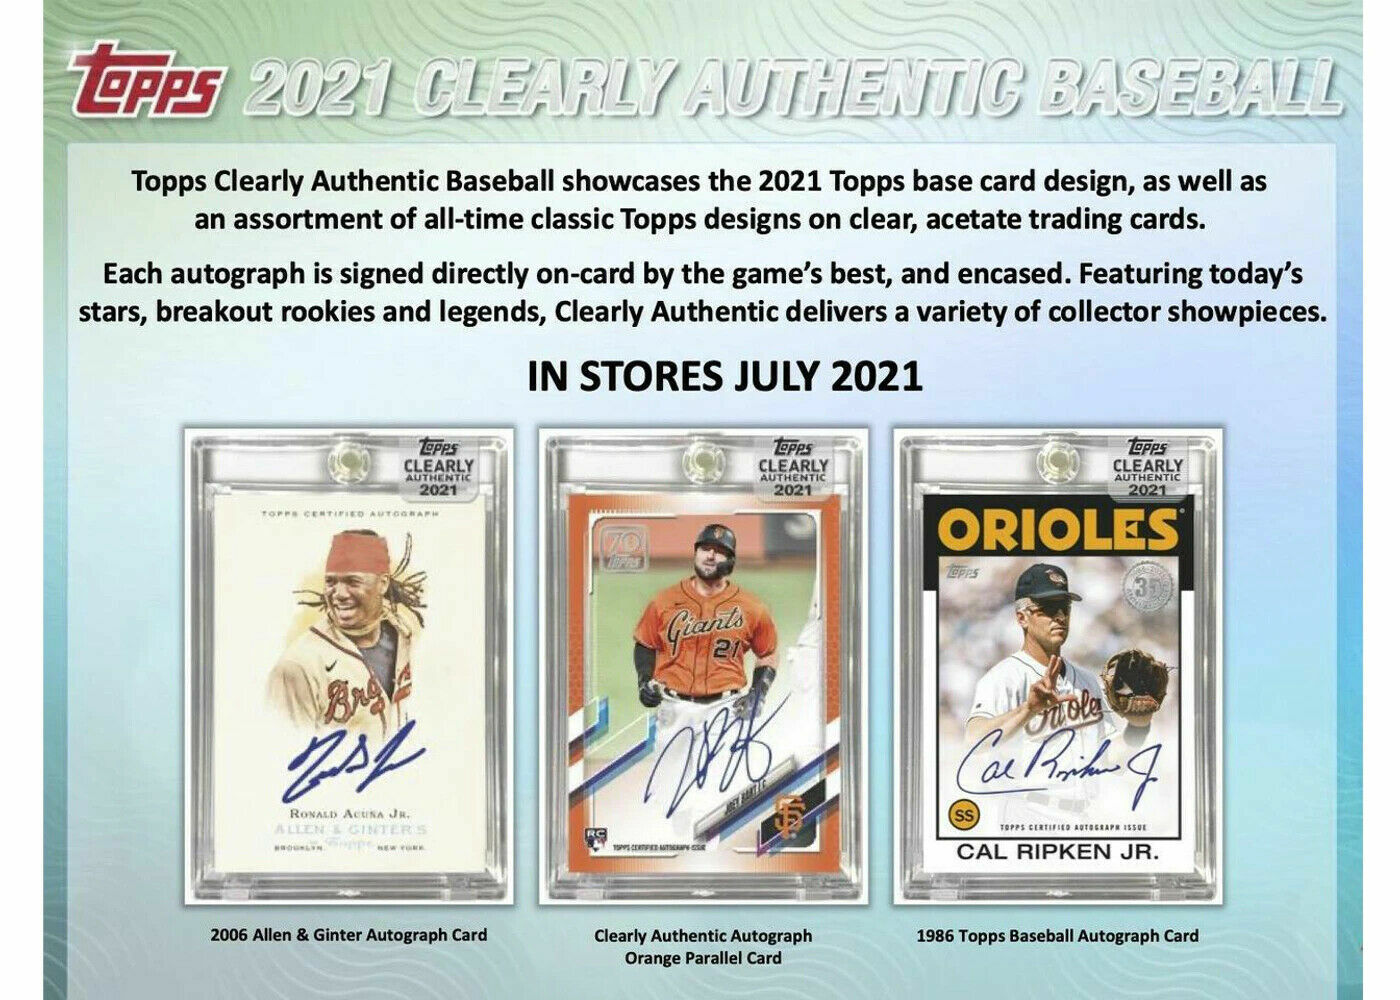 LOS ANGELES ANGELS 2021 TOPPS CLEARLY AUTHENTIC BASEBALL 1/2 CASE 10 BOX BREAK 1